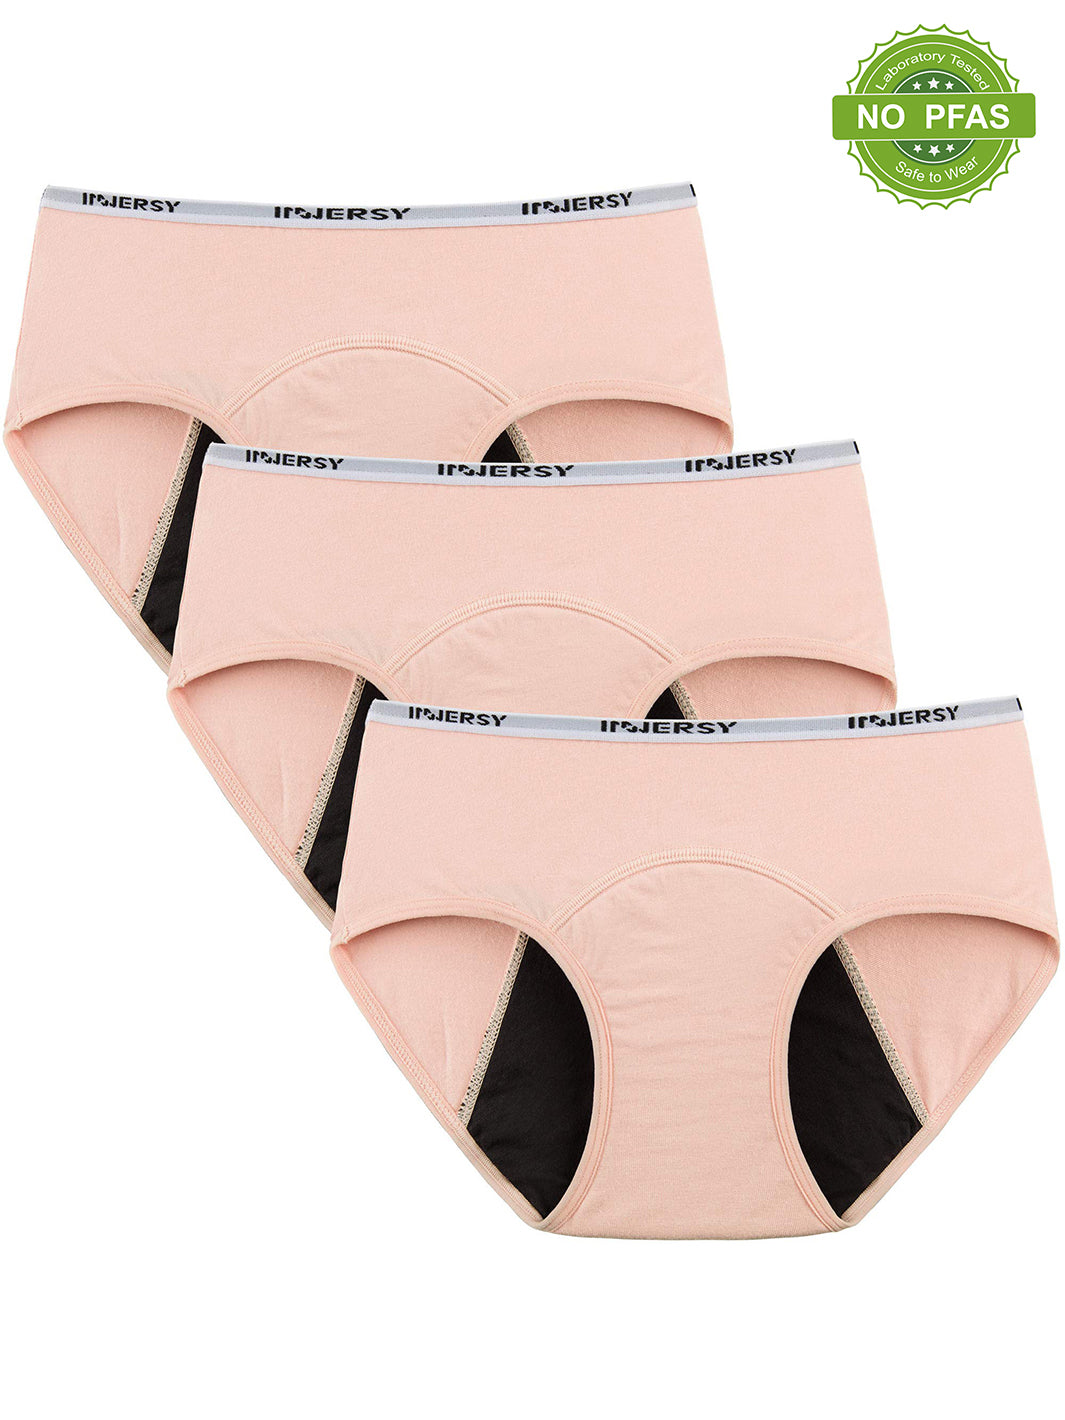 INNERSY Period Panties for Girls Cotton Menstrual Underwear for